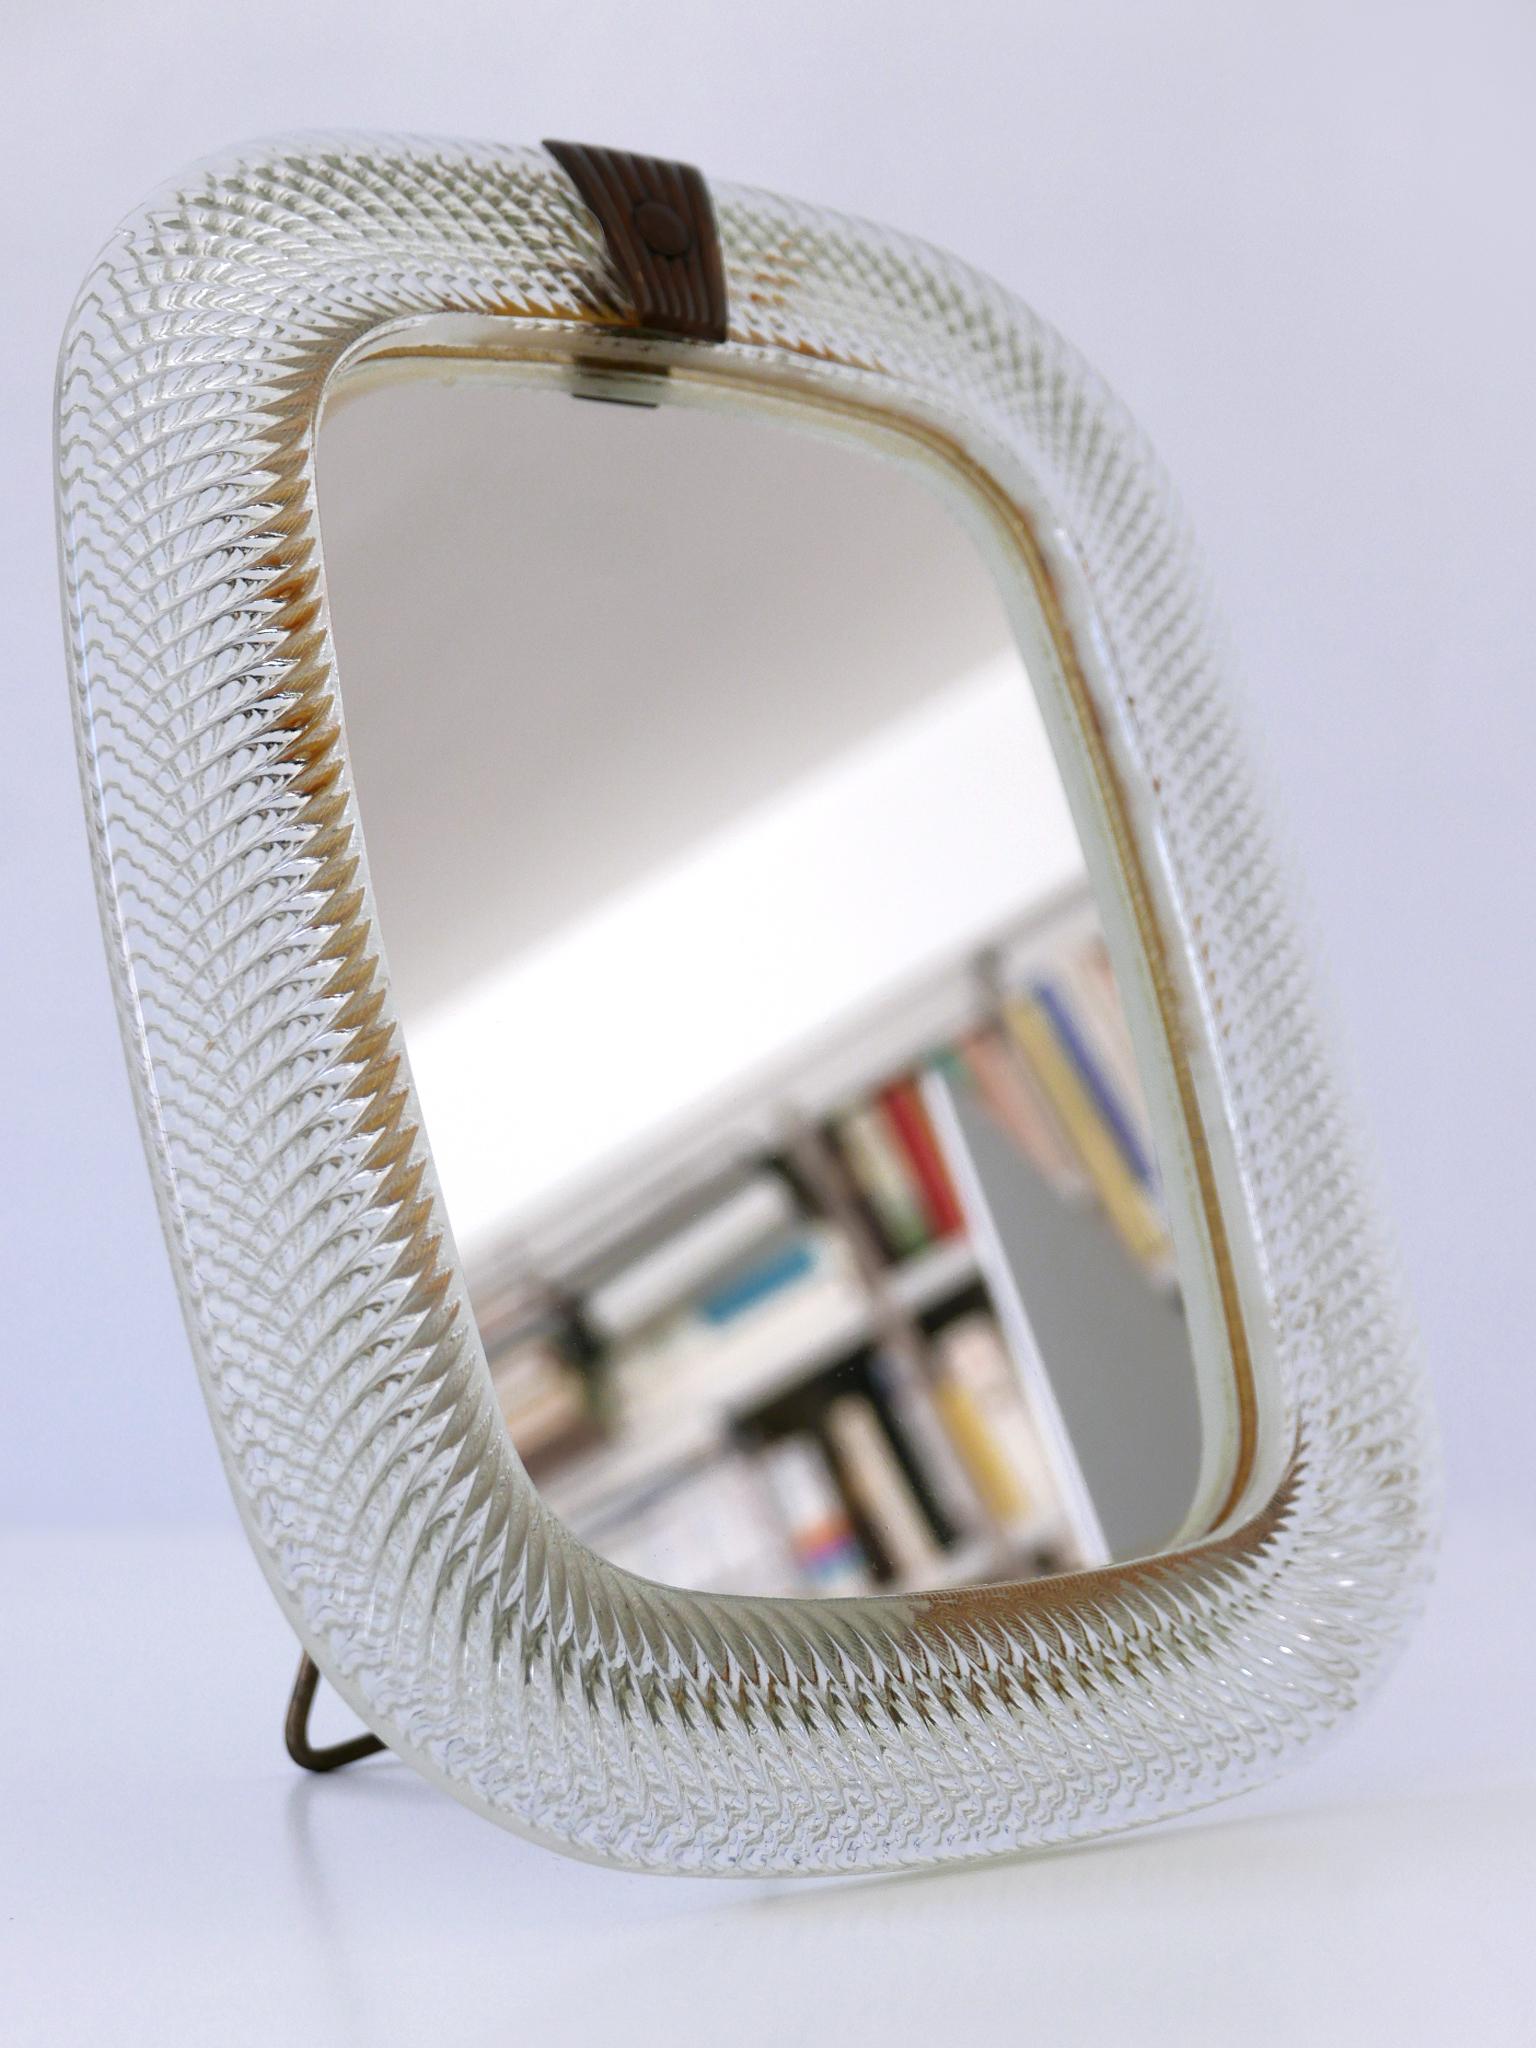 Elegant Mid-Century Modern Wall or Vanity Mirror by Barovier & Toso Italy, 1950s For Sale 6